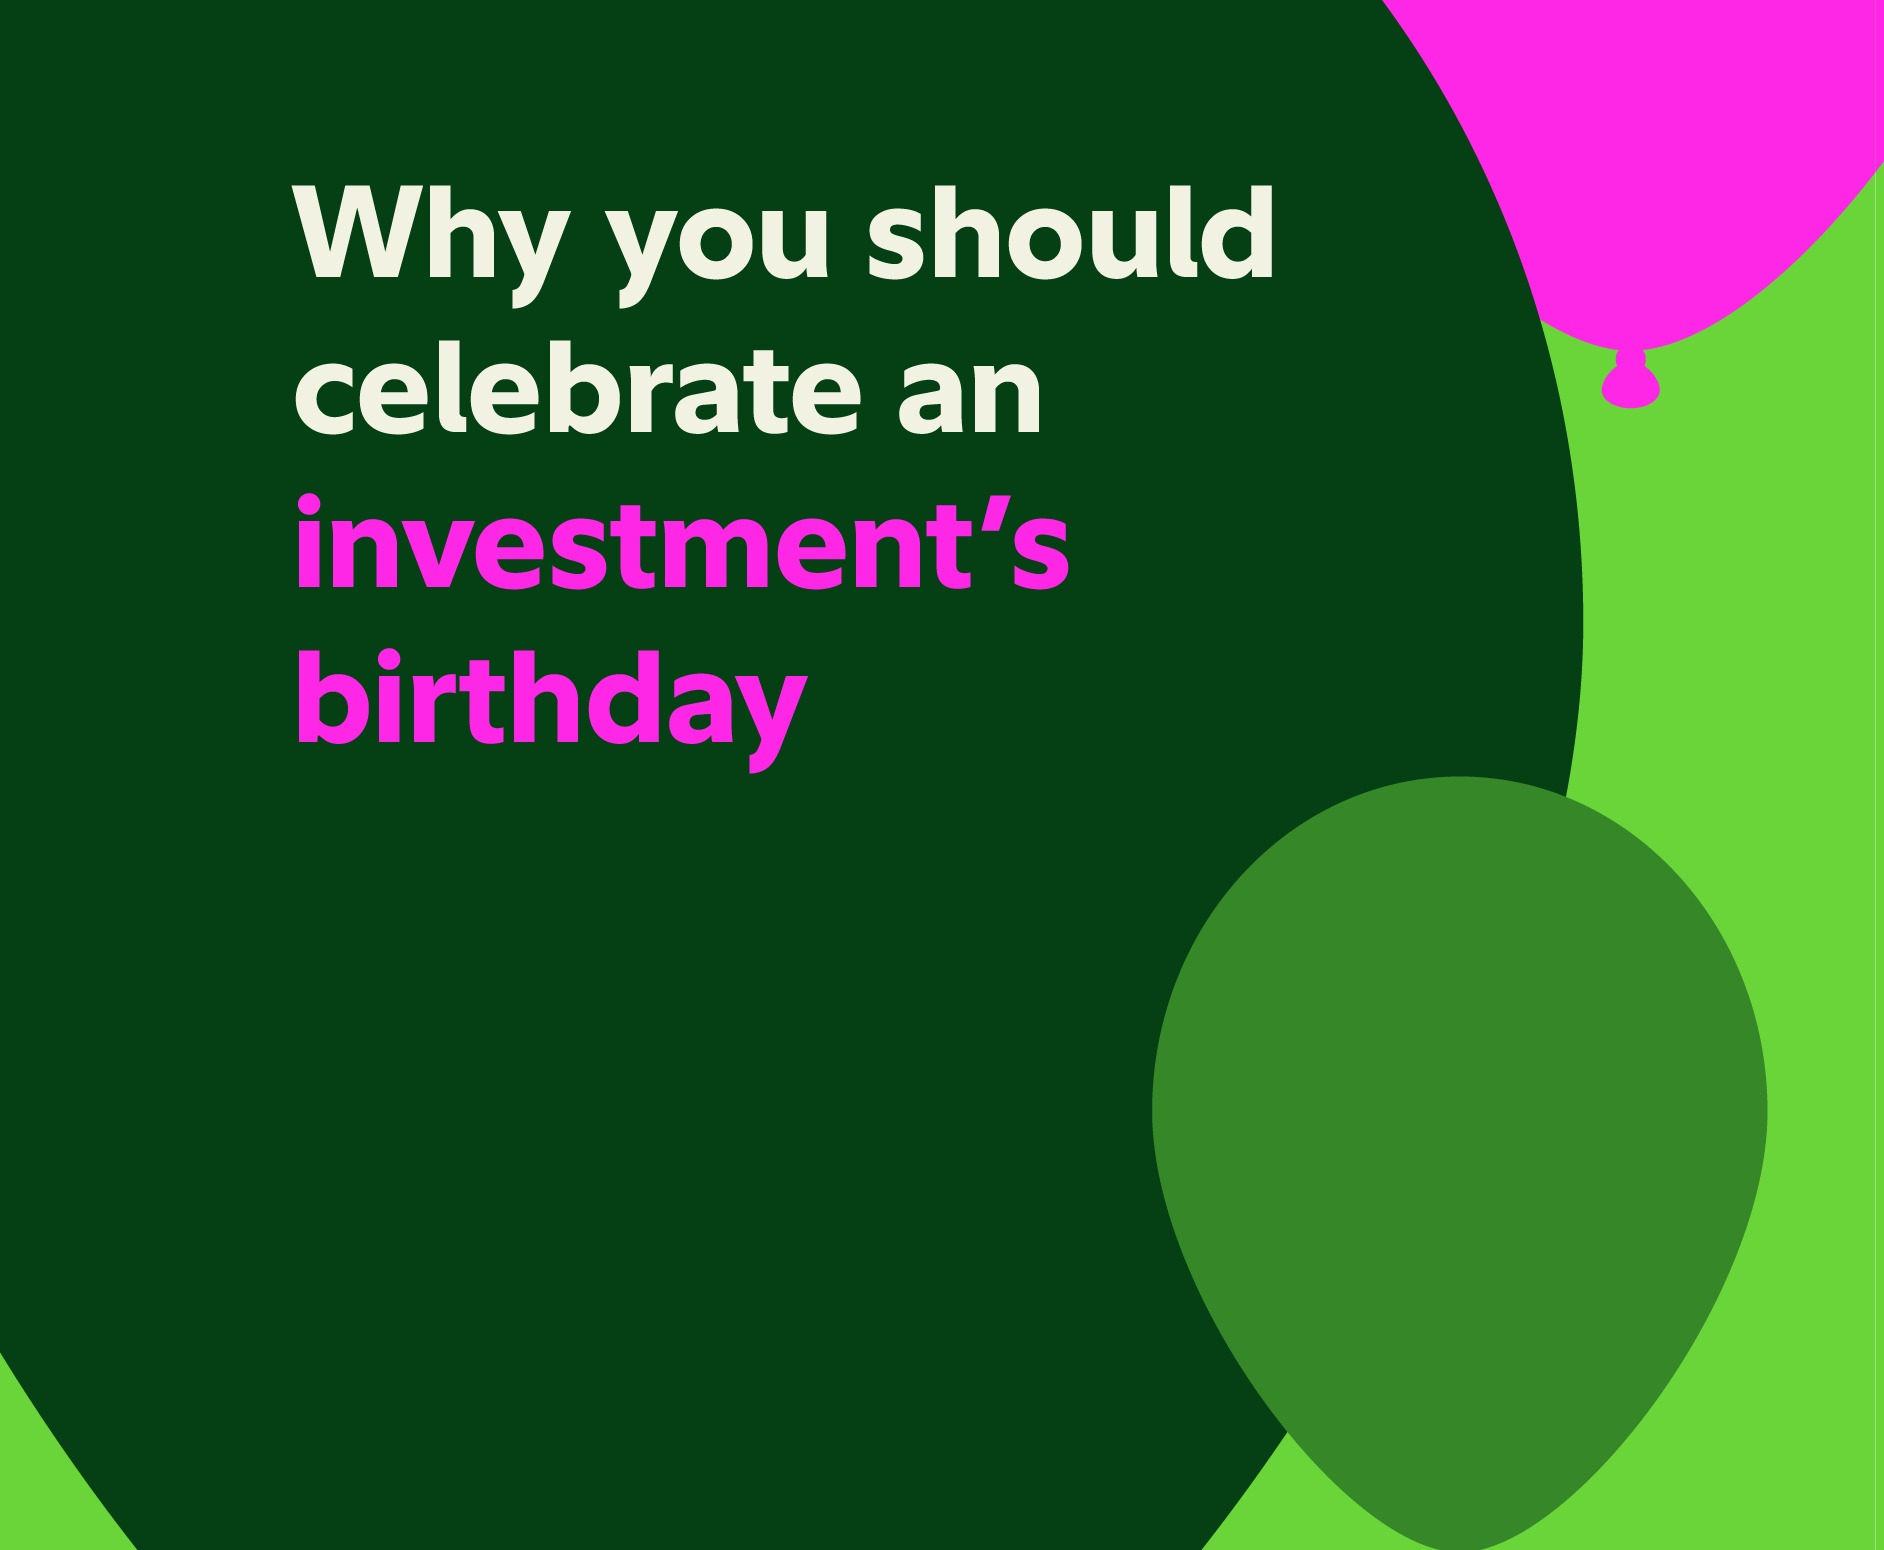 Why you should celebrate an investment's birthday